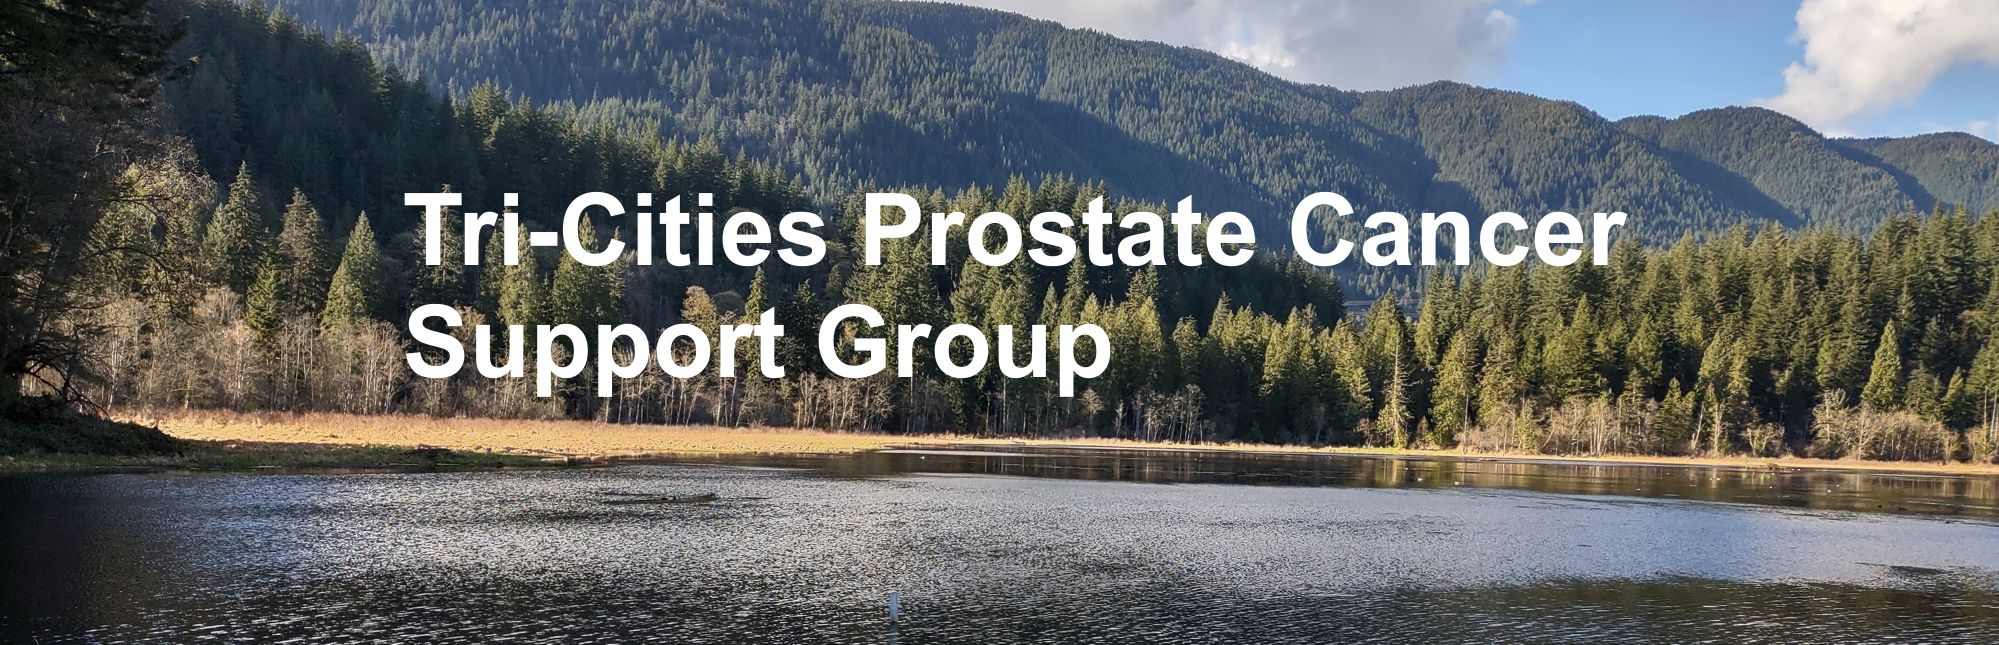 Tri-Cities Prostate Cancer Support Group